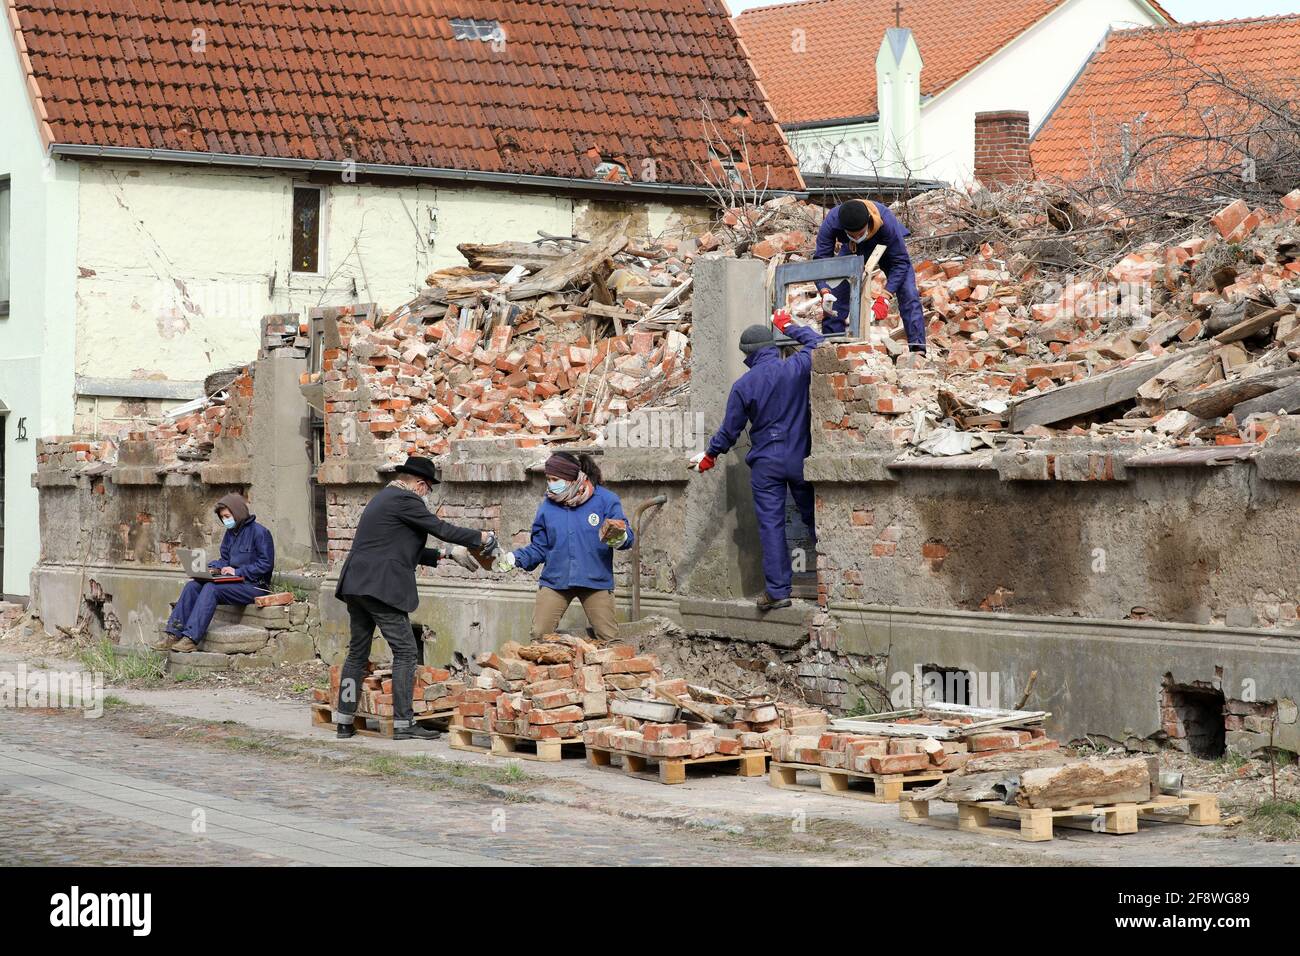 Tribsees, Germany. 15th Apr, 2021. Anna Weberberger (l-r), Ton Matton, initiator and urban planner, Sofie Wagner, project manager, Chaz Gervais and Paulus Goerden from the Art University Linz (Austria) stack bricks and other parts of a demolished house on pallets. The debris will be assembled into an installation at the university that will simulate the atmosphere in the small town. The action is part of the project 'Making Tribsees' Future', which aims to create an atmosphere of departure in the town. Credit: Bernd Wüstneck/dpa-Zentralbild/ZB/dpa/Alamy Live News Stock Photo